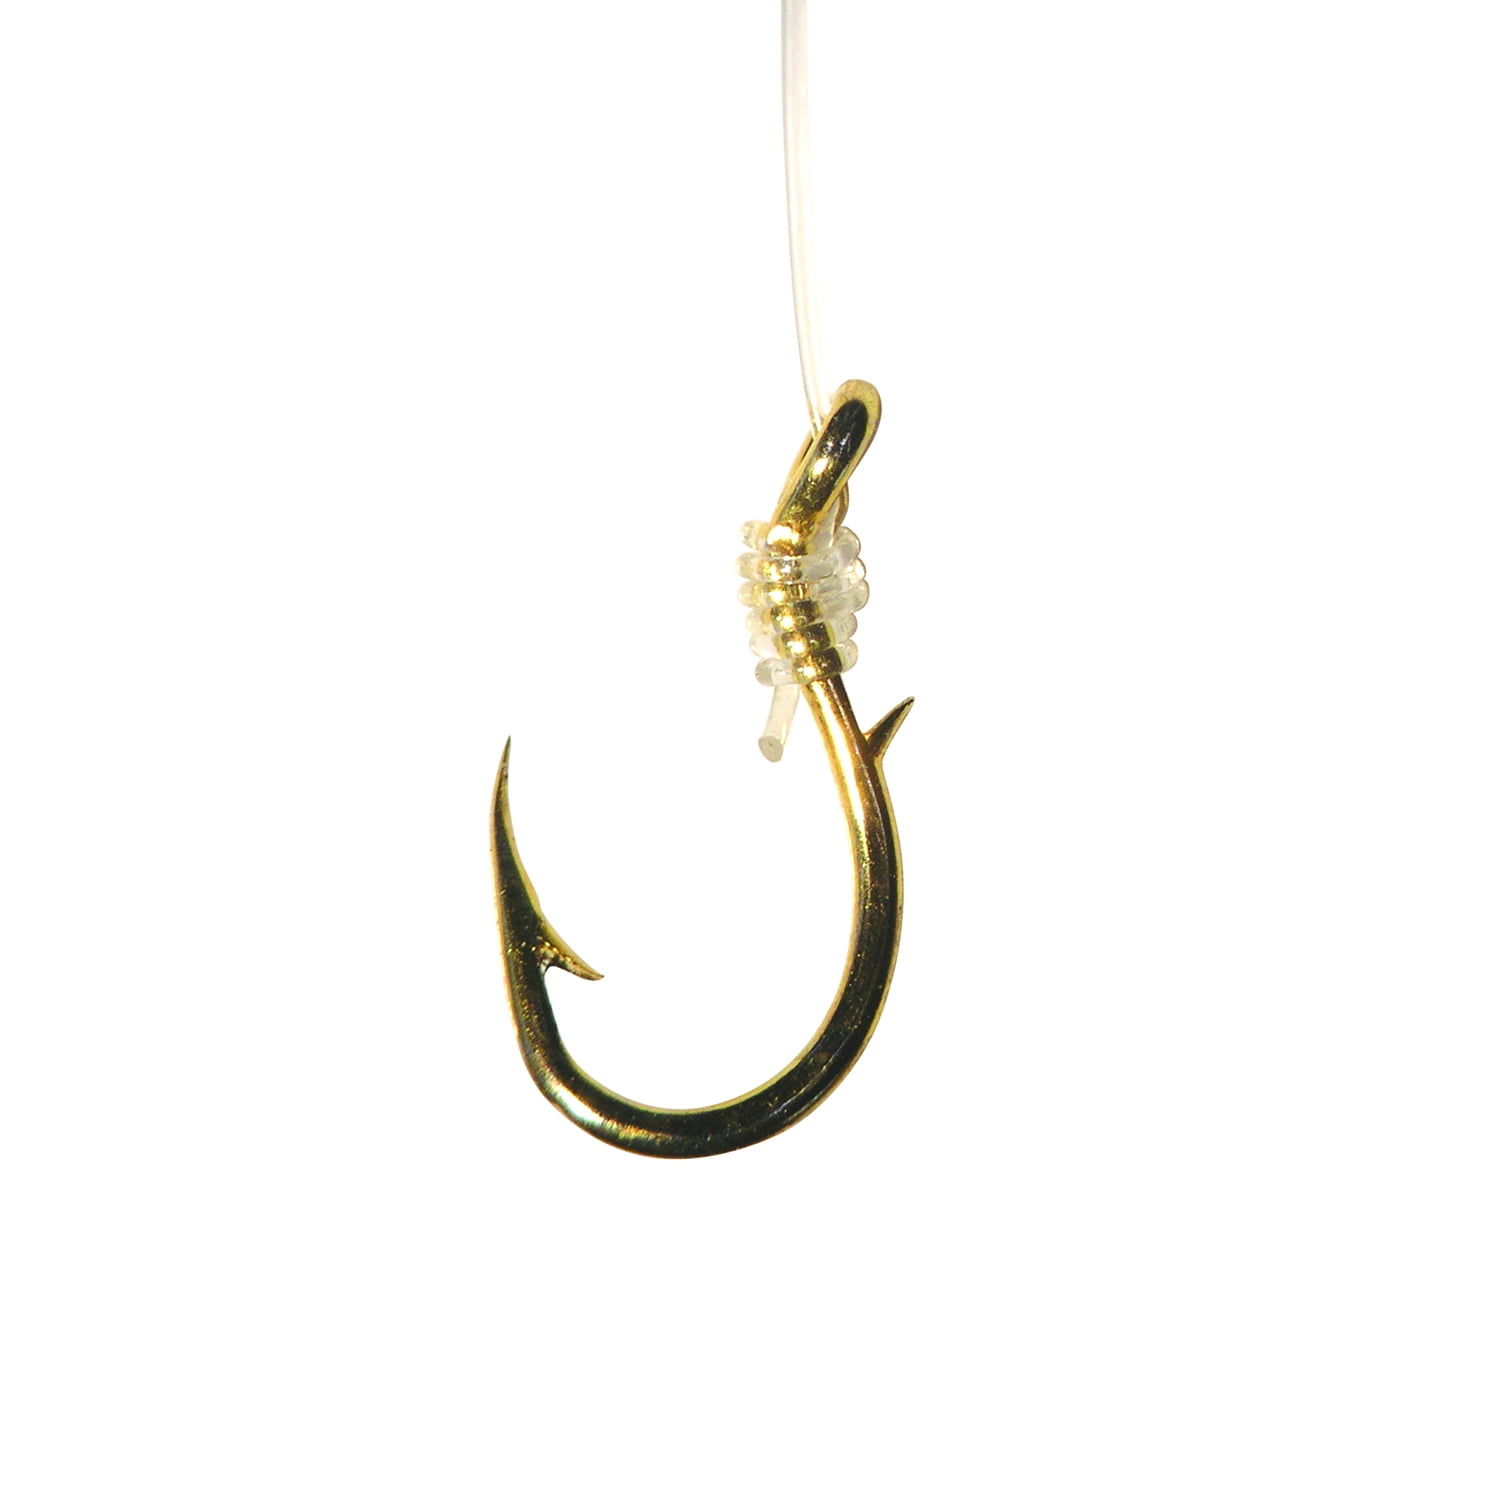 Eagle Claw 073H-10 Snells Salmon Egg Hooks, 6 Count, Size 10 Hook 